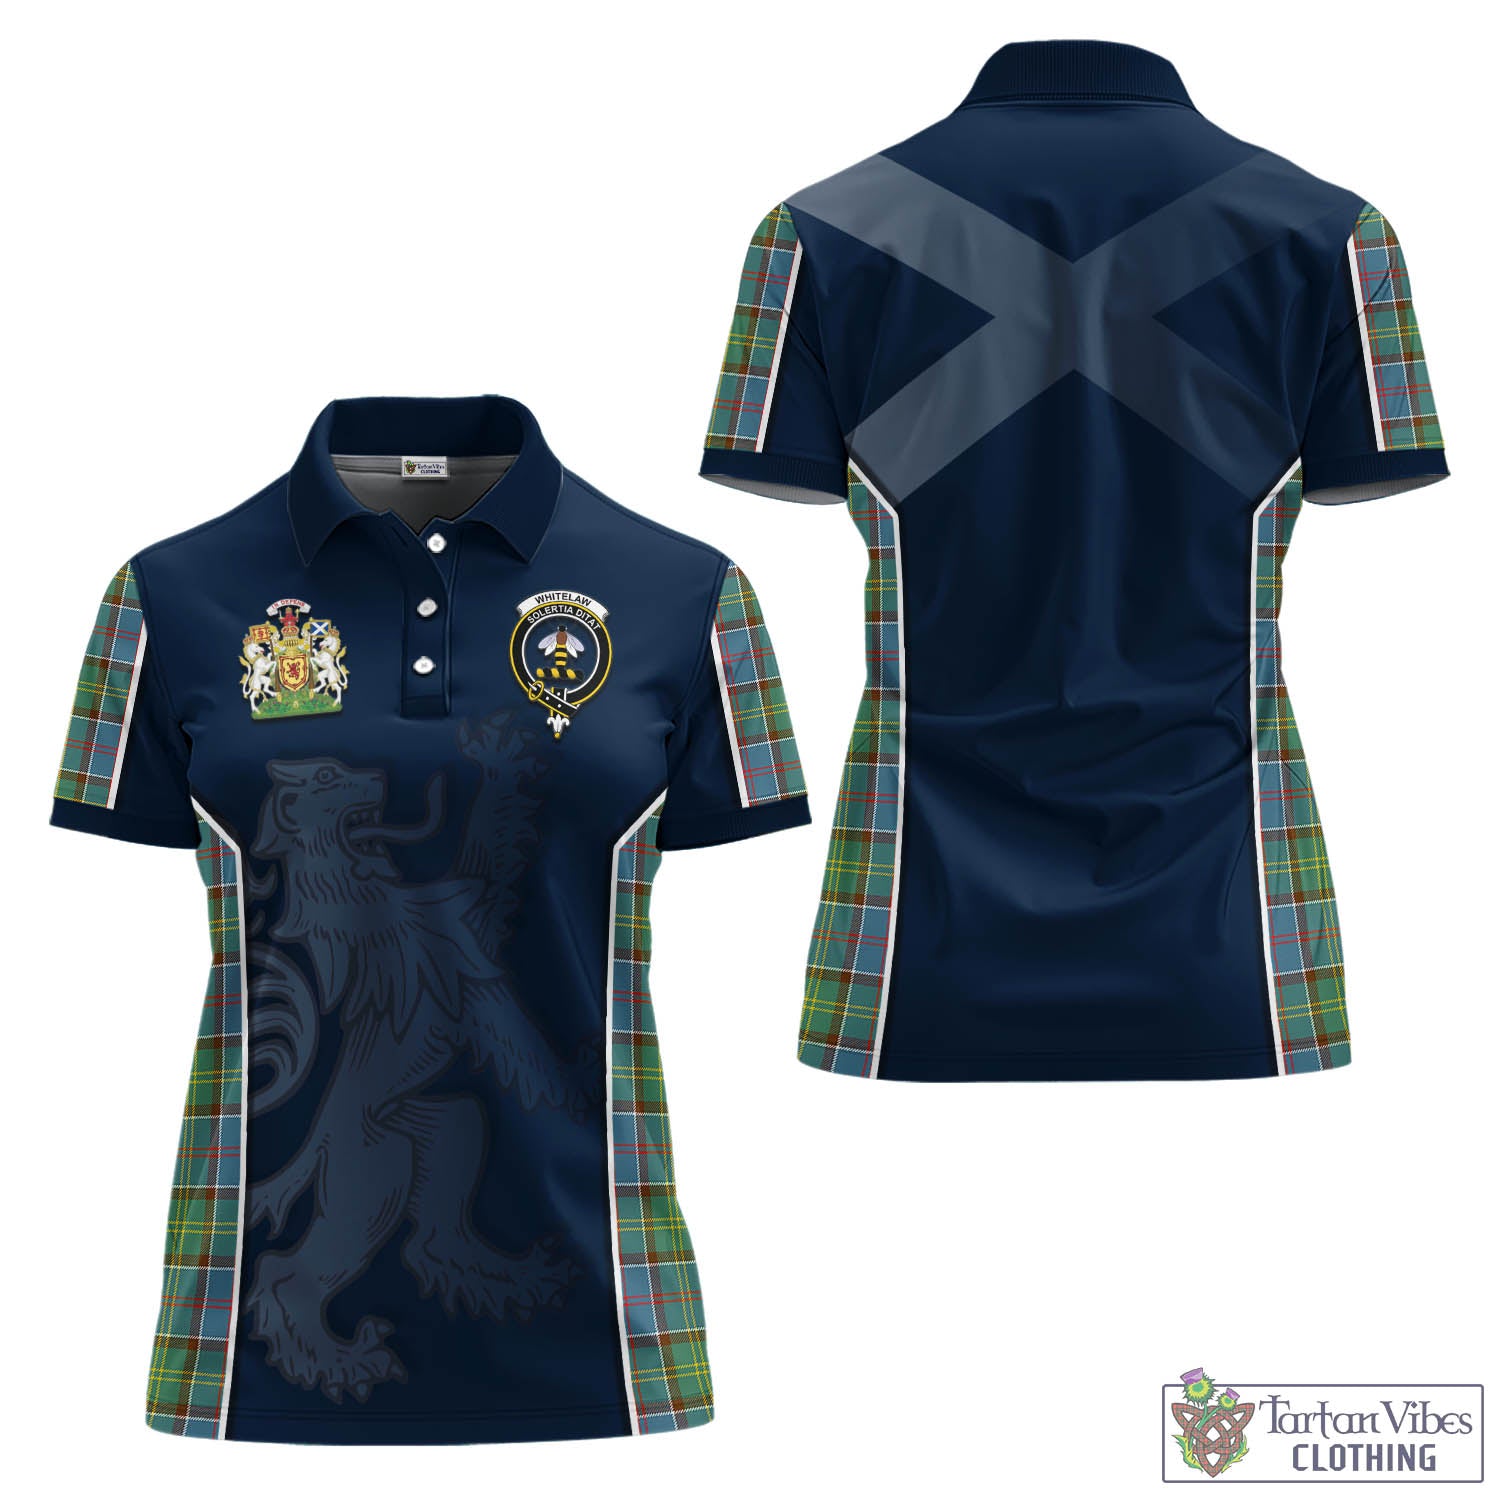 Tartan Vibes Clothing Whitelaw Tartan Women's Polo Shirt with Family Crest and Lion Rampant Vibes Sport Style